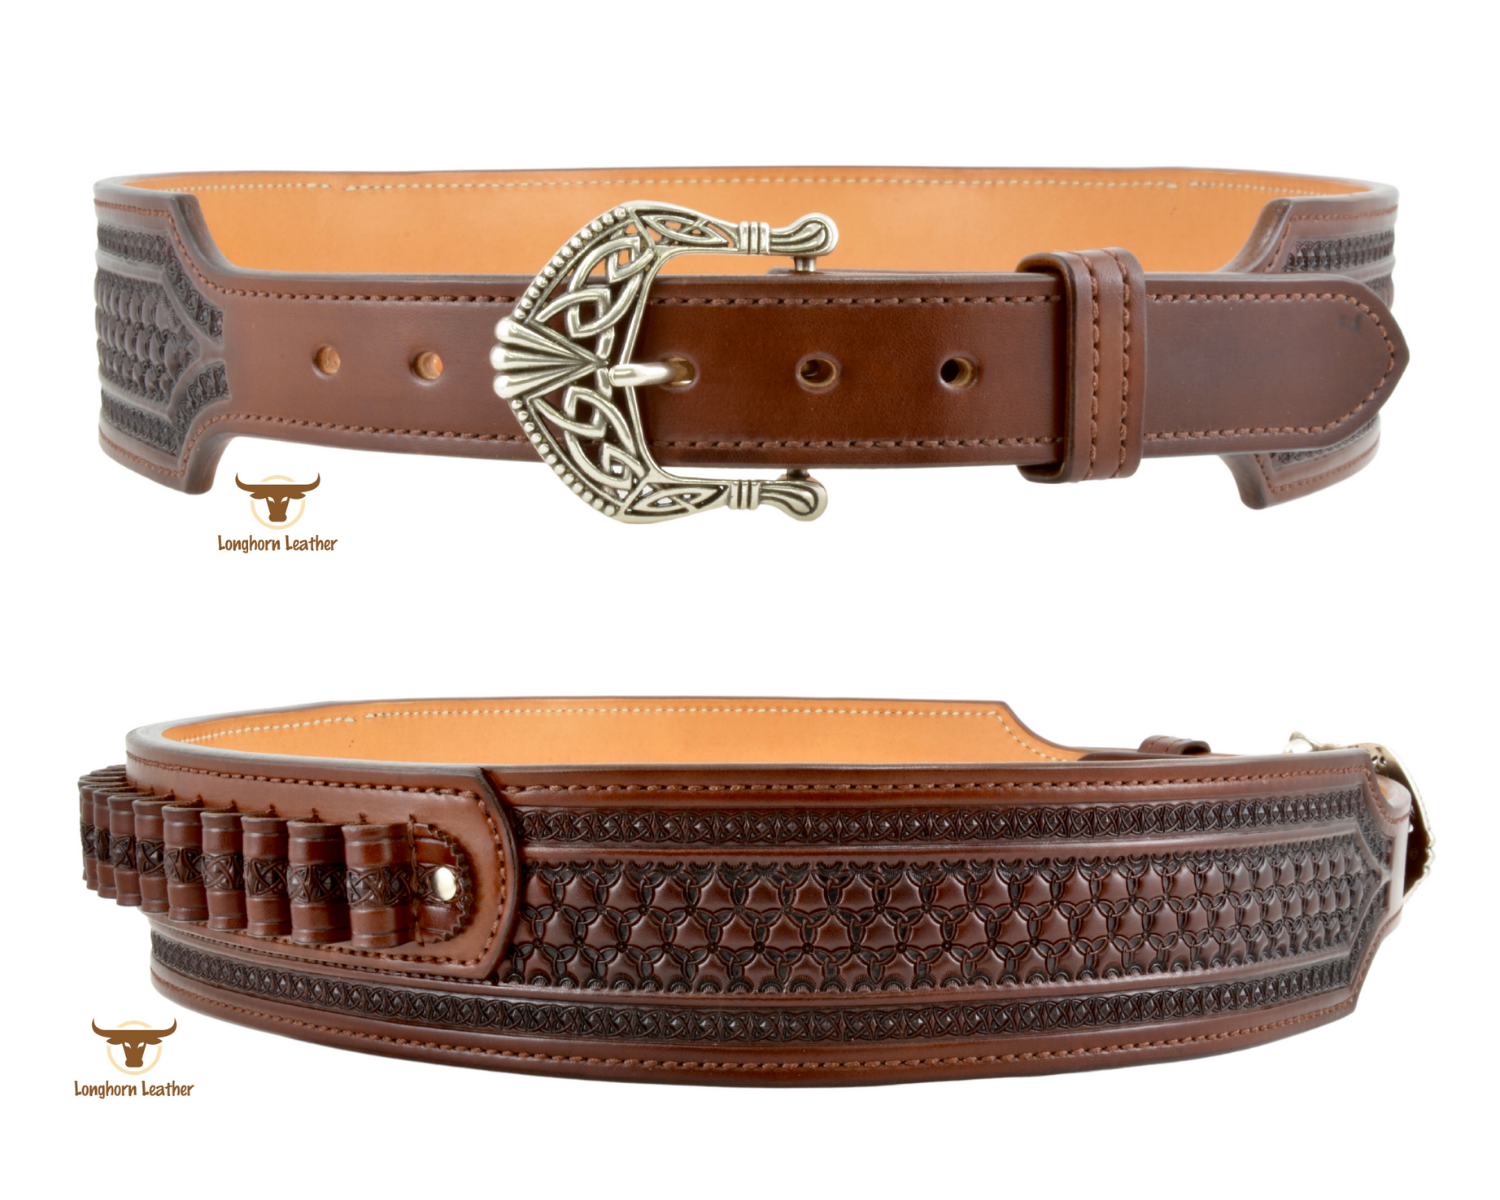 Custom leather cartridge belt featuring a "Celtic" inspired design.  Individually handcrafted at Longhorn Leather AZ.